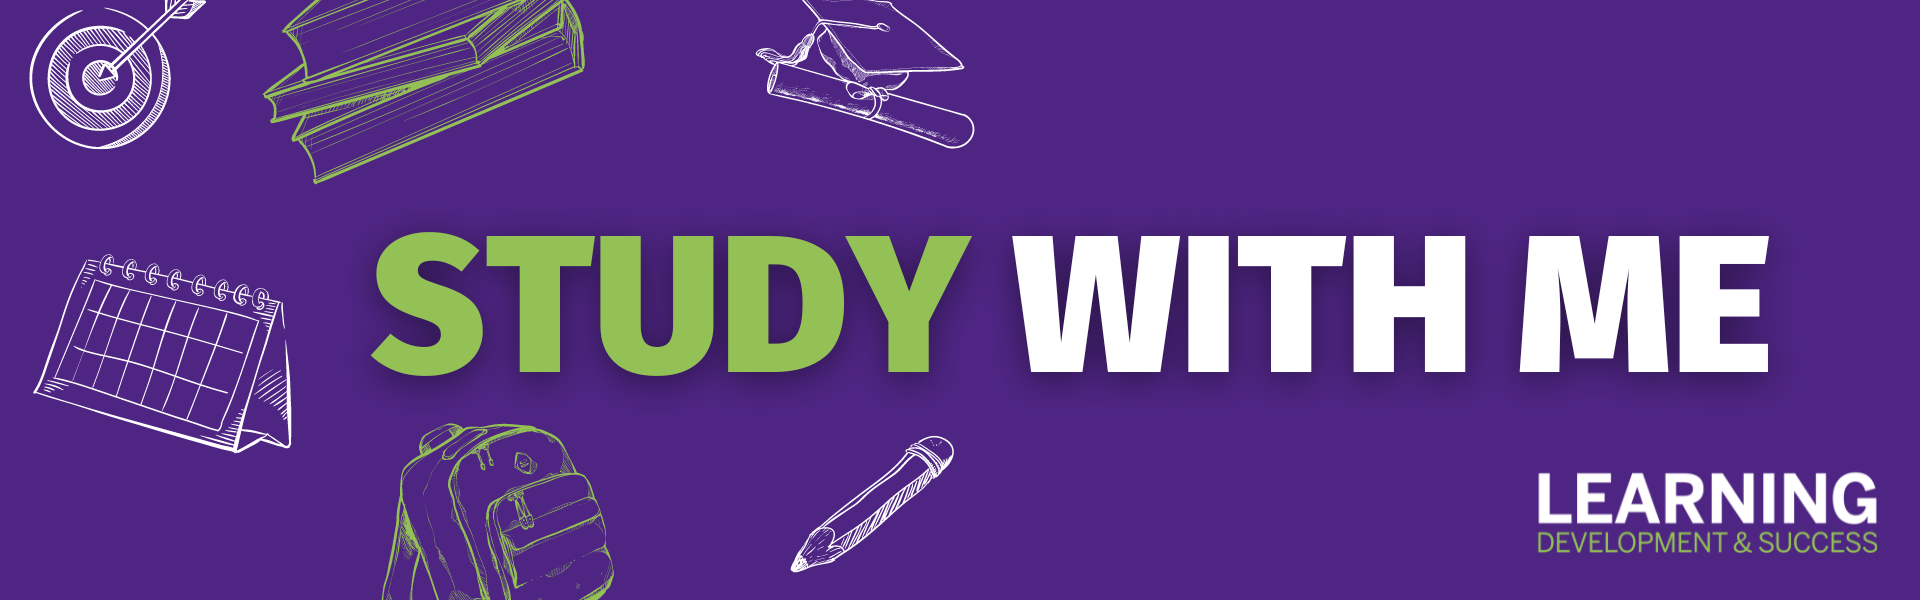 Purple background with various education-related icons sketched in white and green. Text reads Study With Me, Learning Development & Success